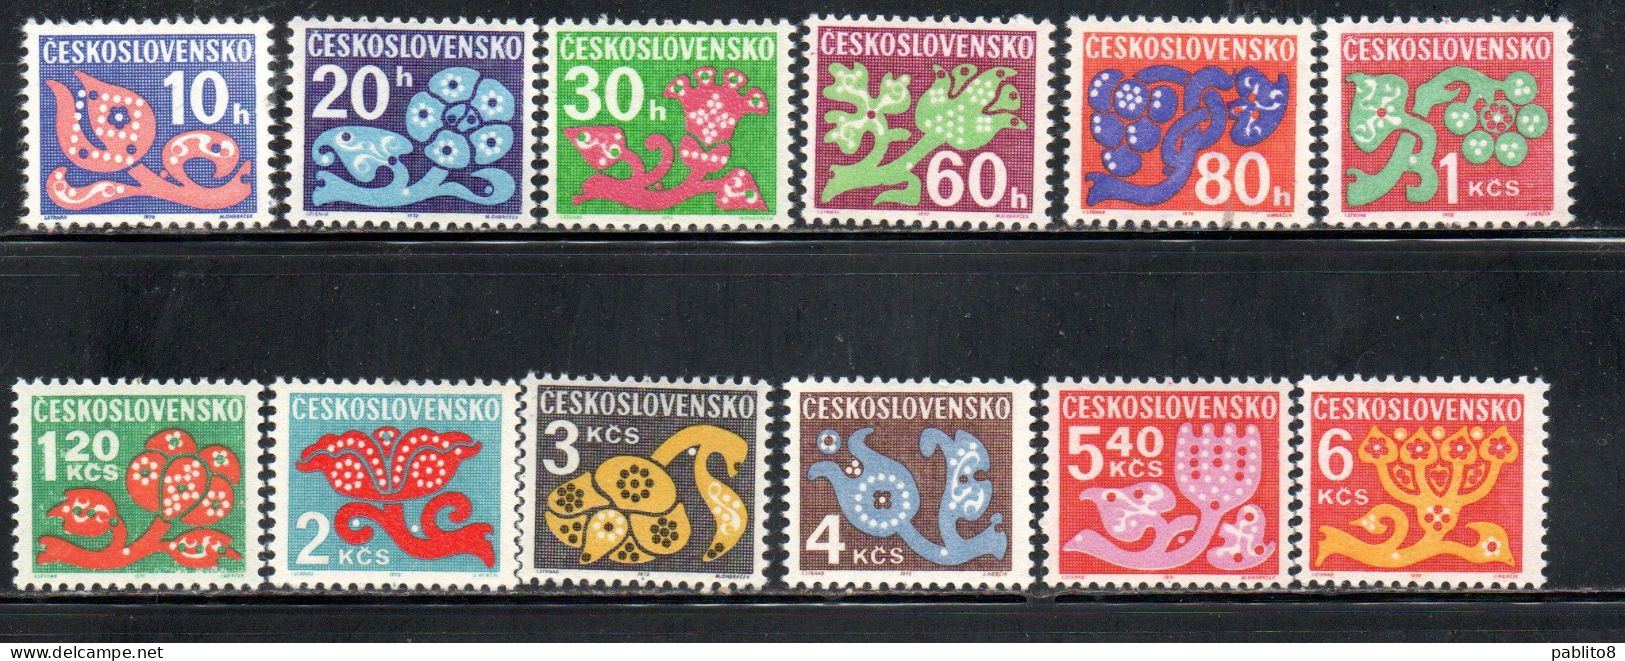 CZECHOSLOVAKIA CECOSLOVACCHIA 1971 1972 POSTAGE DUE STAMPS TAXE SEGNATASSE COMPLETE SET SERIE COMPLETA MNH - Timbres-taxe